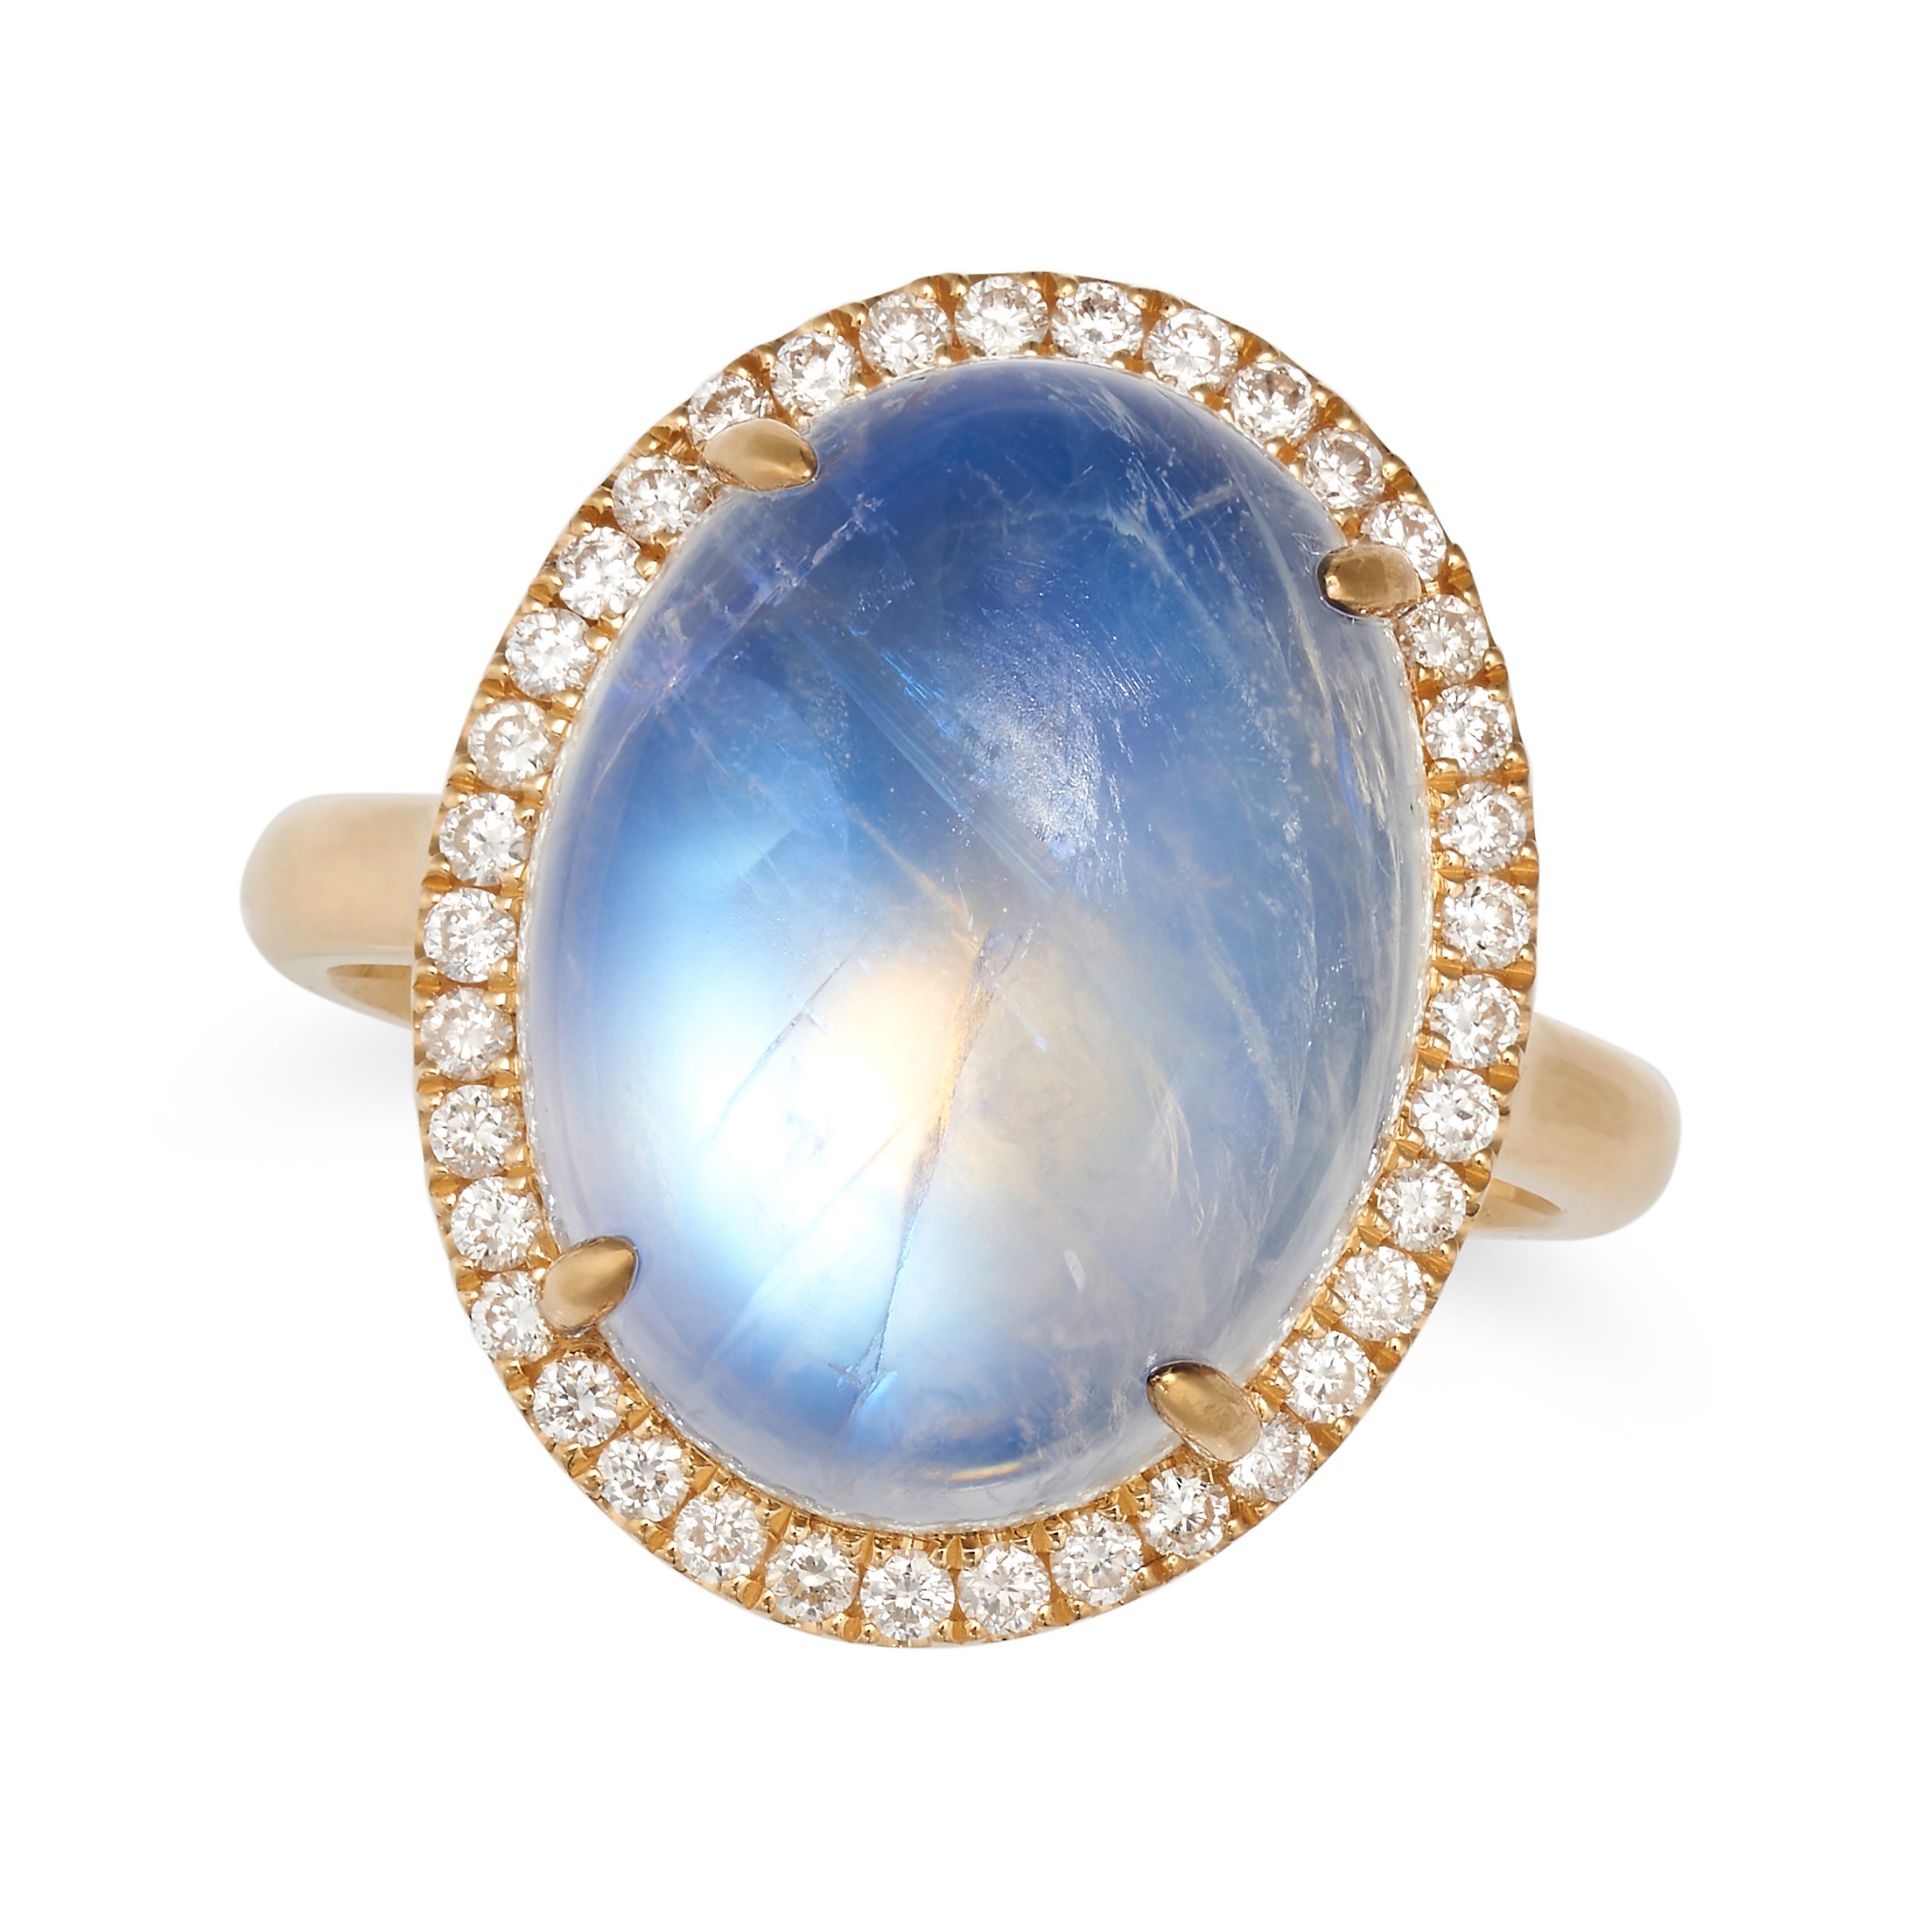 A RAINBOW MOONSTONE AND DIAMOND CLUSTER RING in 18ct yellow gold, set with an oval cabochon rainb...